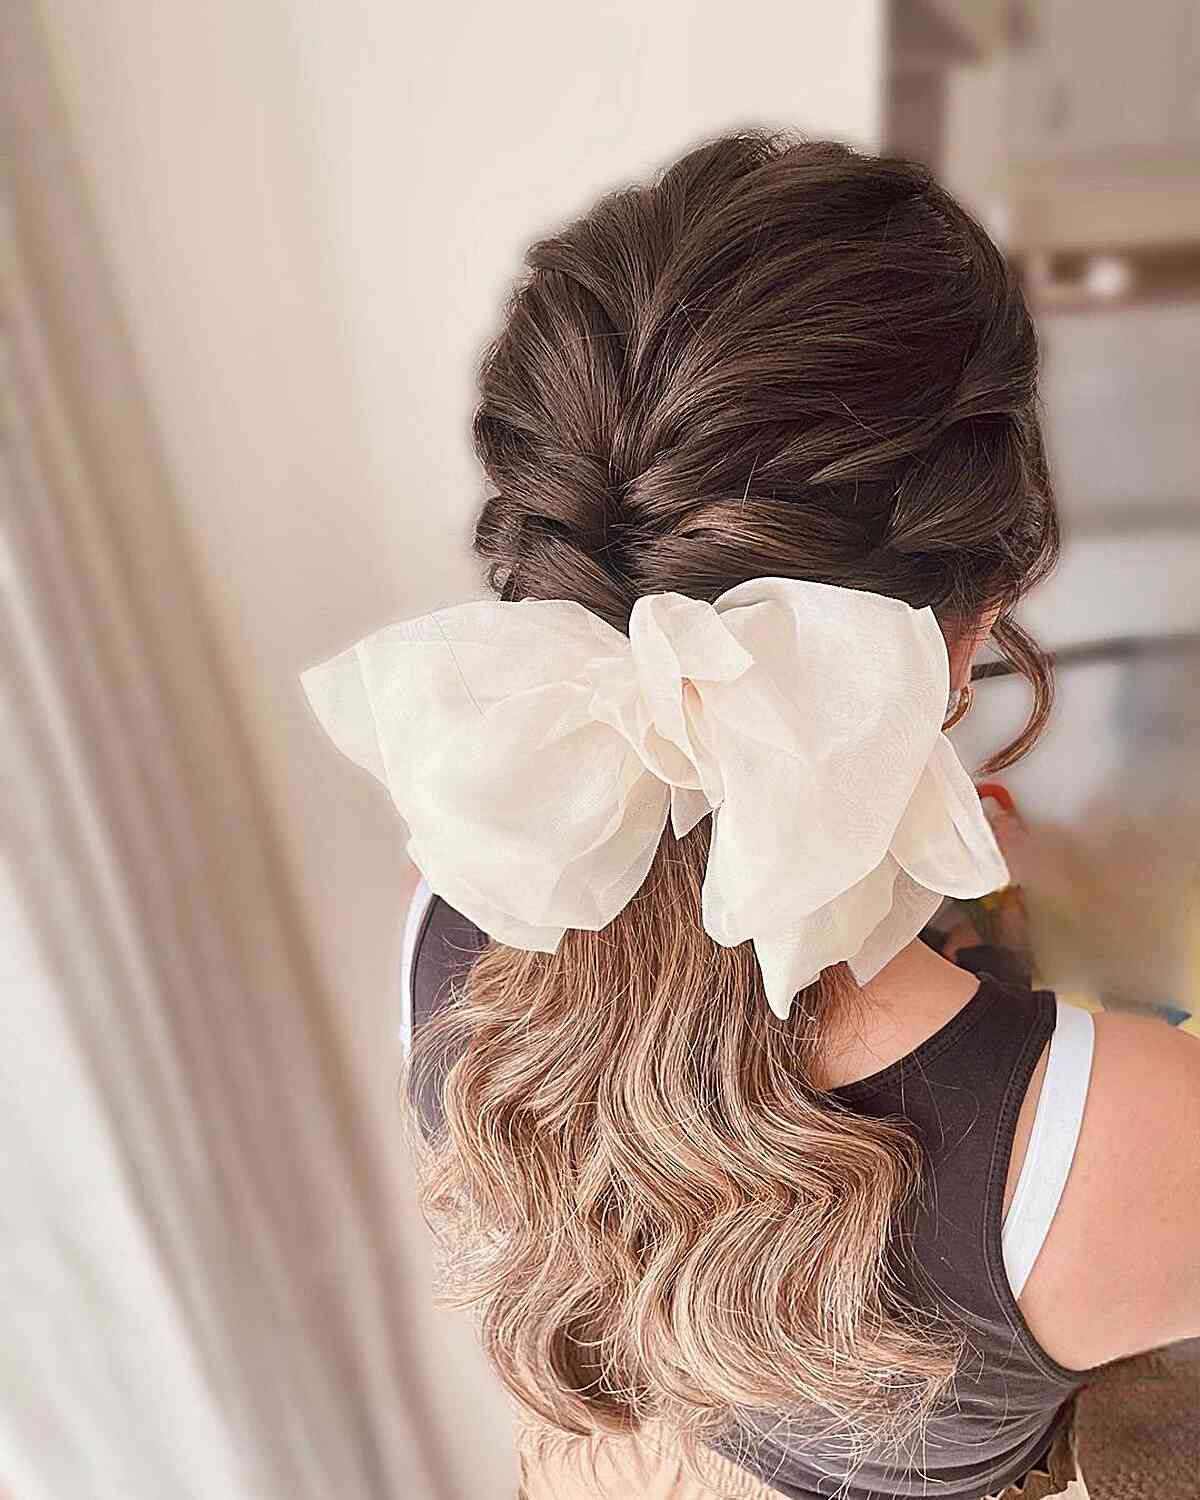 festival hairstyles,half up festival hairstyles,
easy festival hairstyles,
cute festival hairstyles,
christmas hairstyles,
cute christmas hairstyles,
easy christmas hairstyles,
christmas hairstyles for black hair,
christmas hairstyles easy,
christmas hairstyles for black girl,
easy christmas hairstyles for short hair,
short hair christmas hairstyles,
Top 10 Christmas Cute Festival Hairstyles to Rock Your Look in 2023,